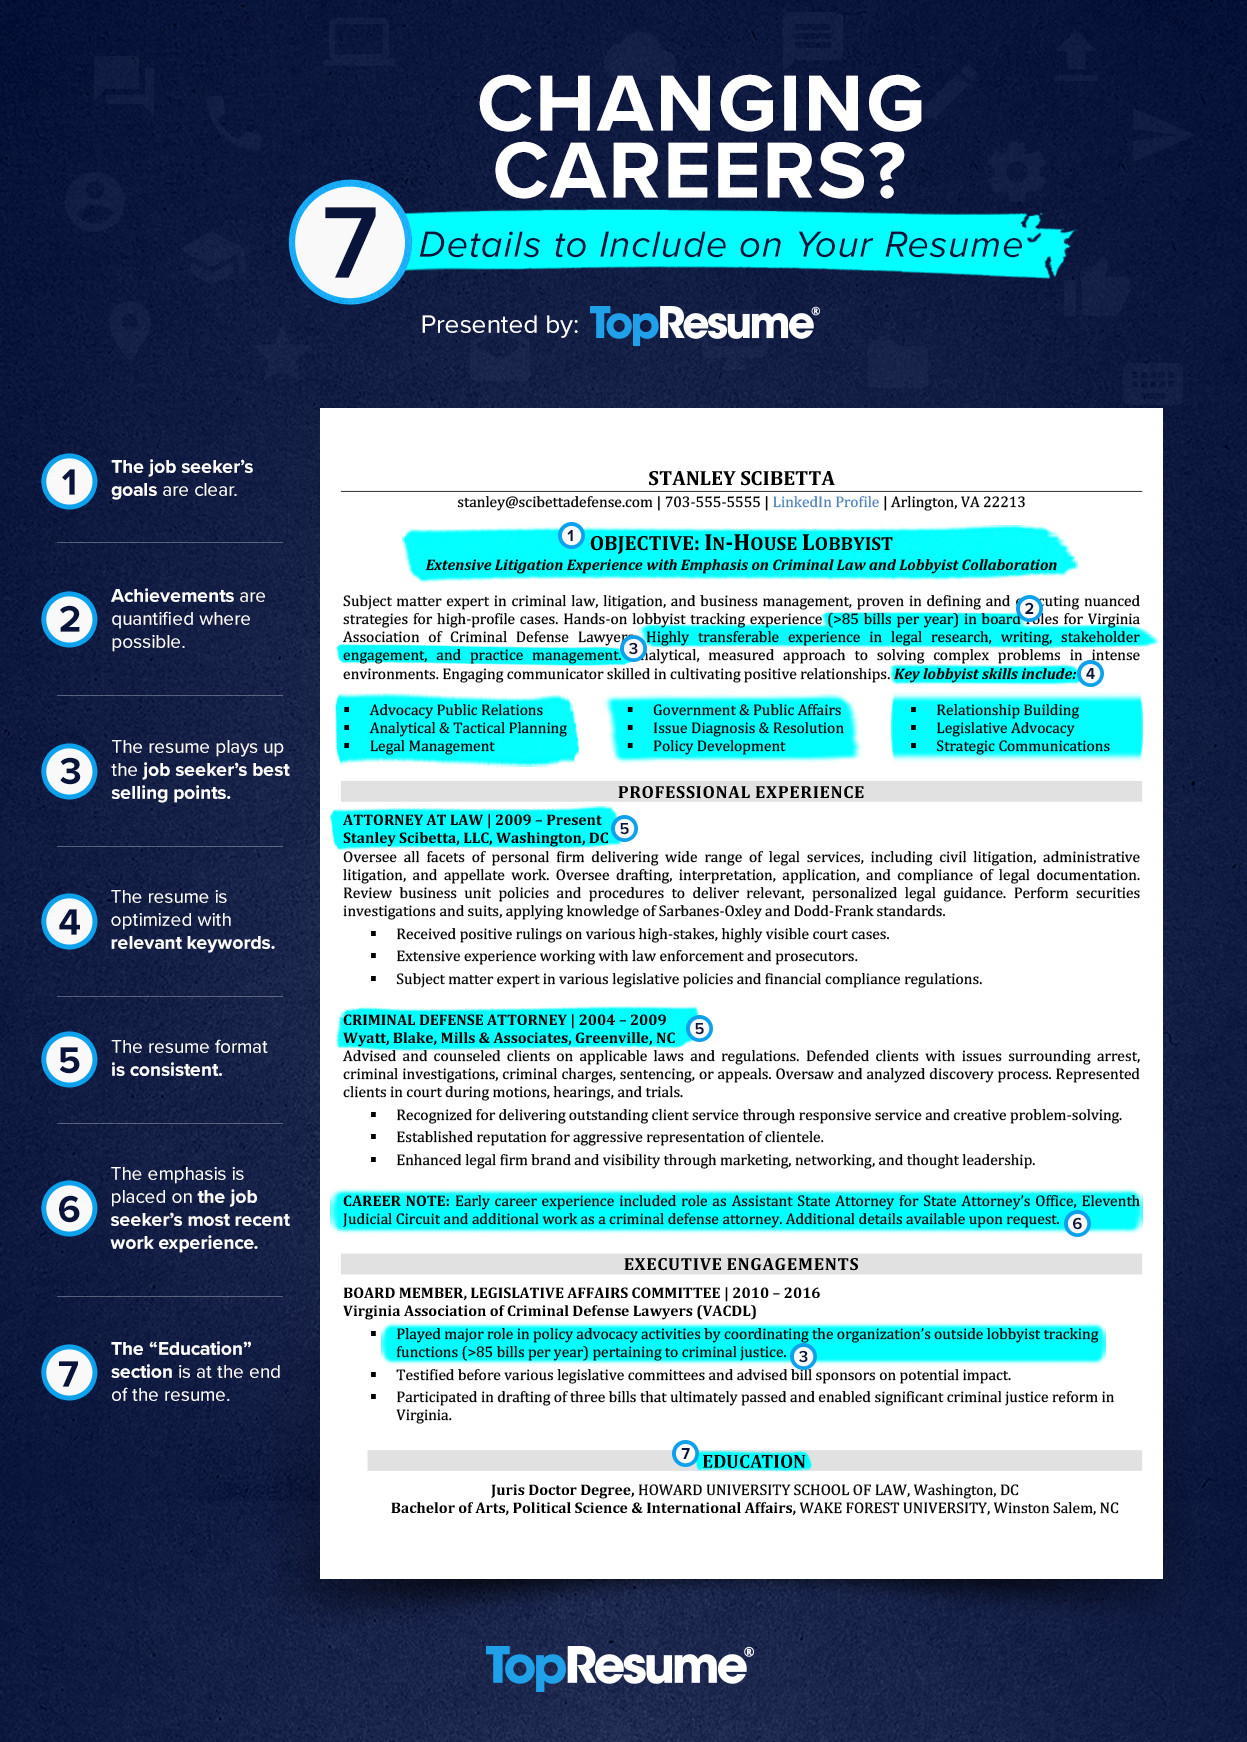 Resume for Career Change with No Experience Sample Changing Careers? 7 Details to Include On Your Resume topresume